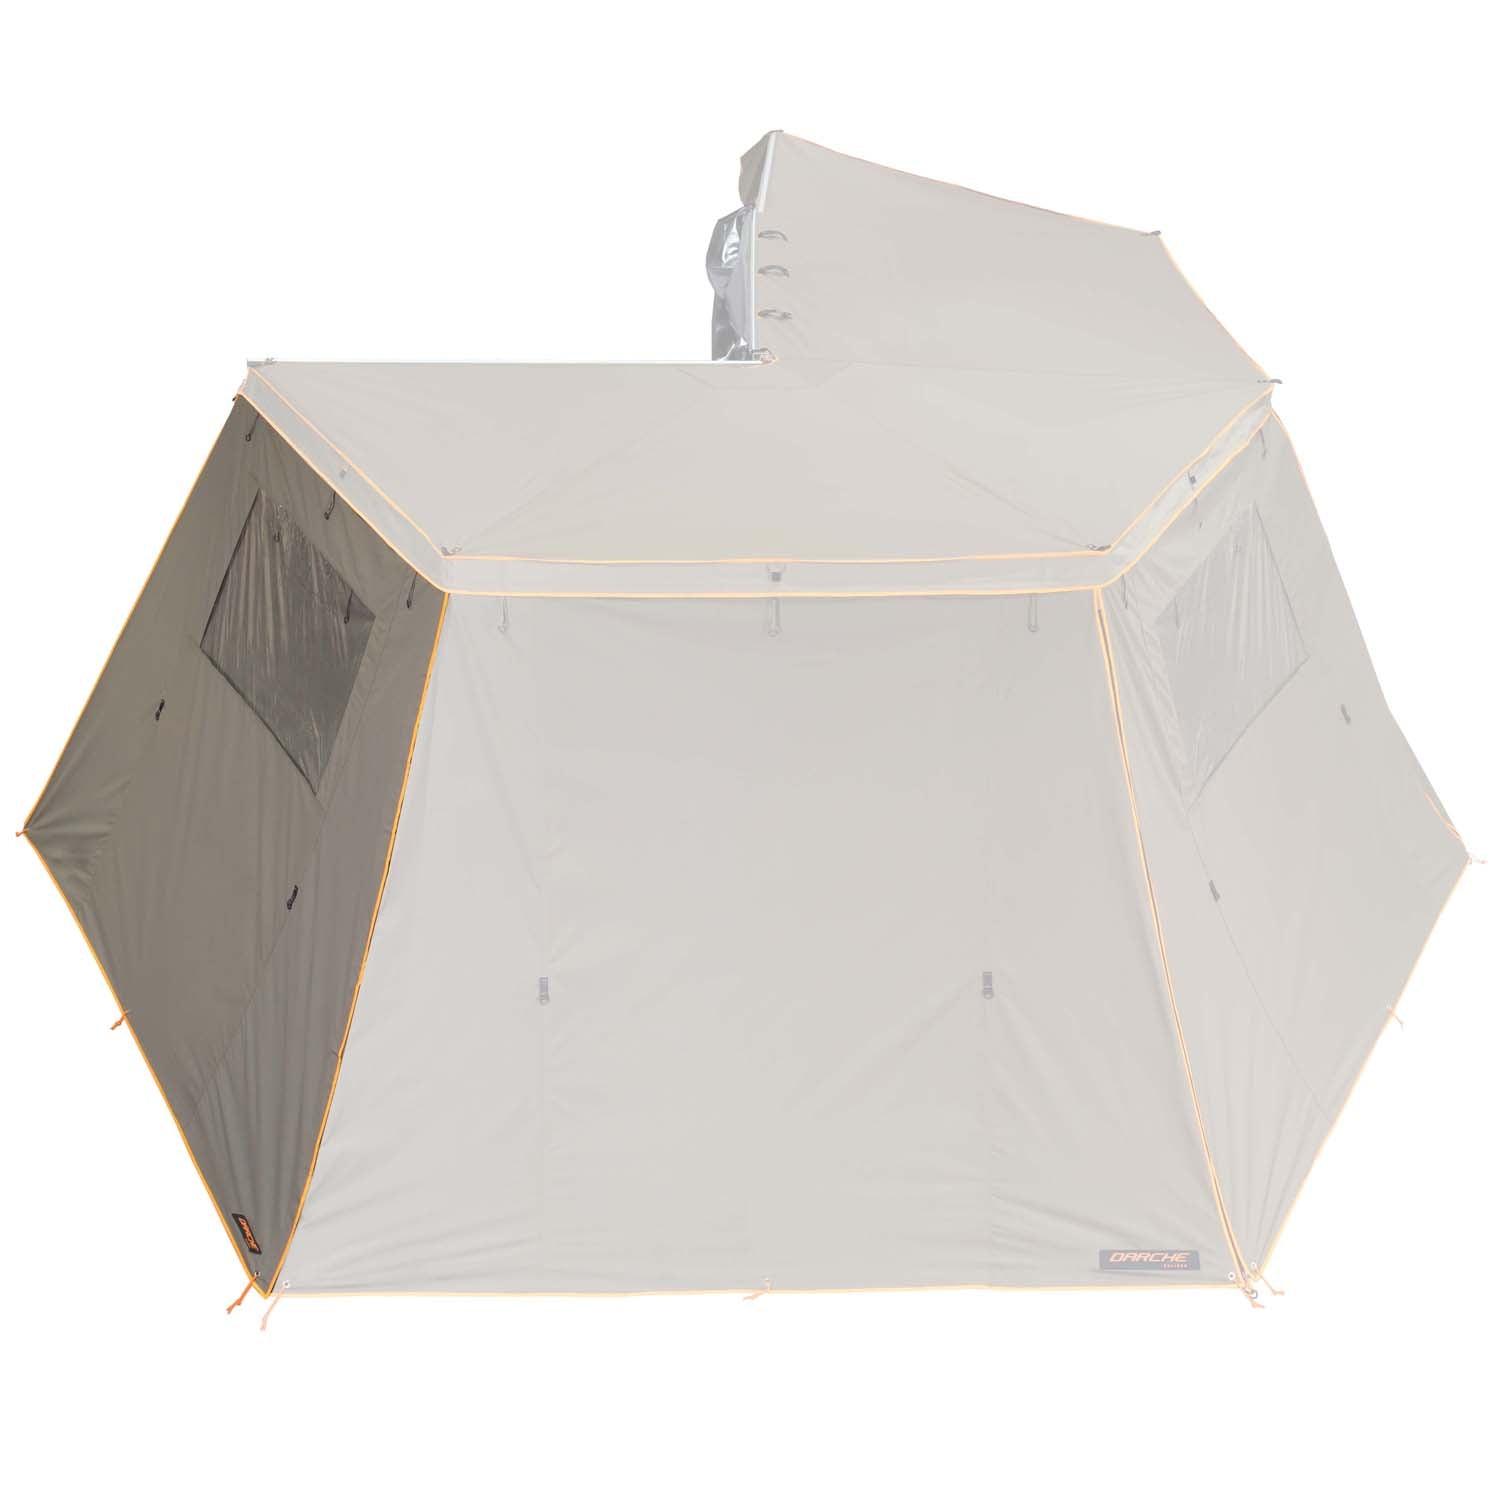 Eclipse 270 Wall ECLIPSE 270 WALL 3 WINDOW RIGHT GEN 2 Shelters Darche- Adventure Imports